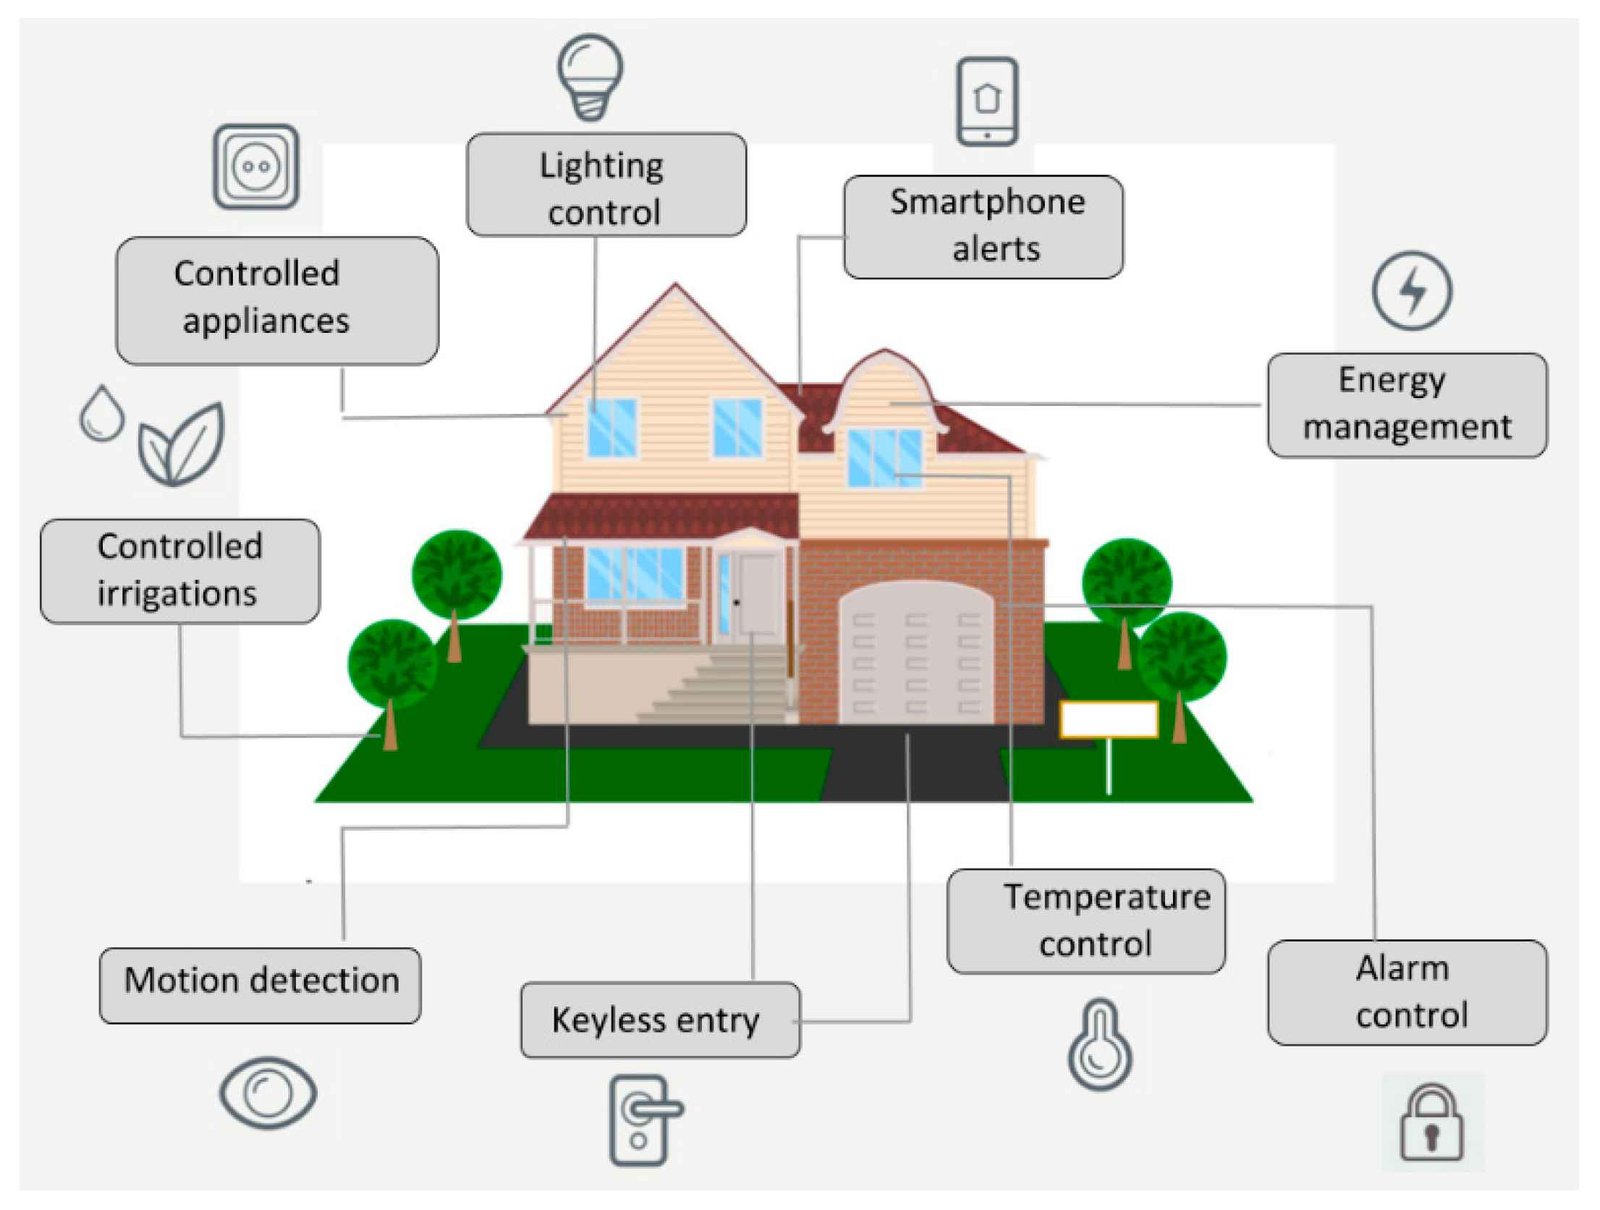 1687424628Smart home bath automation for energy efficiency